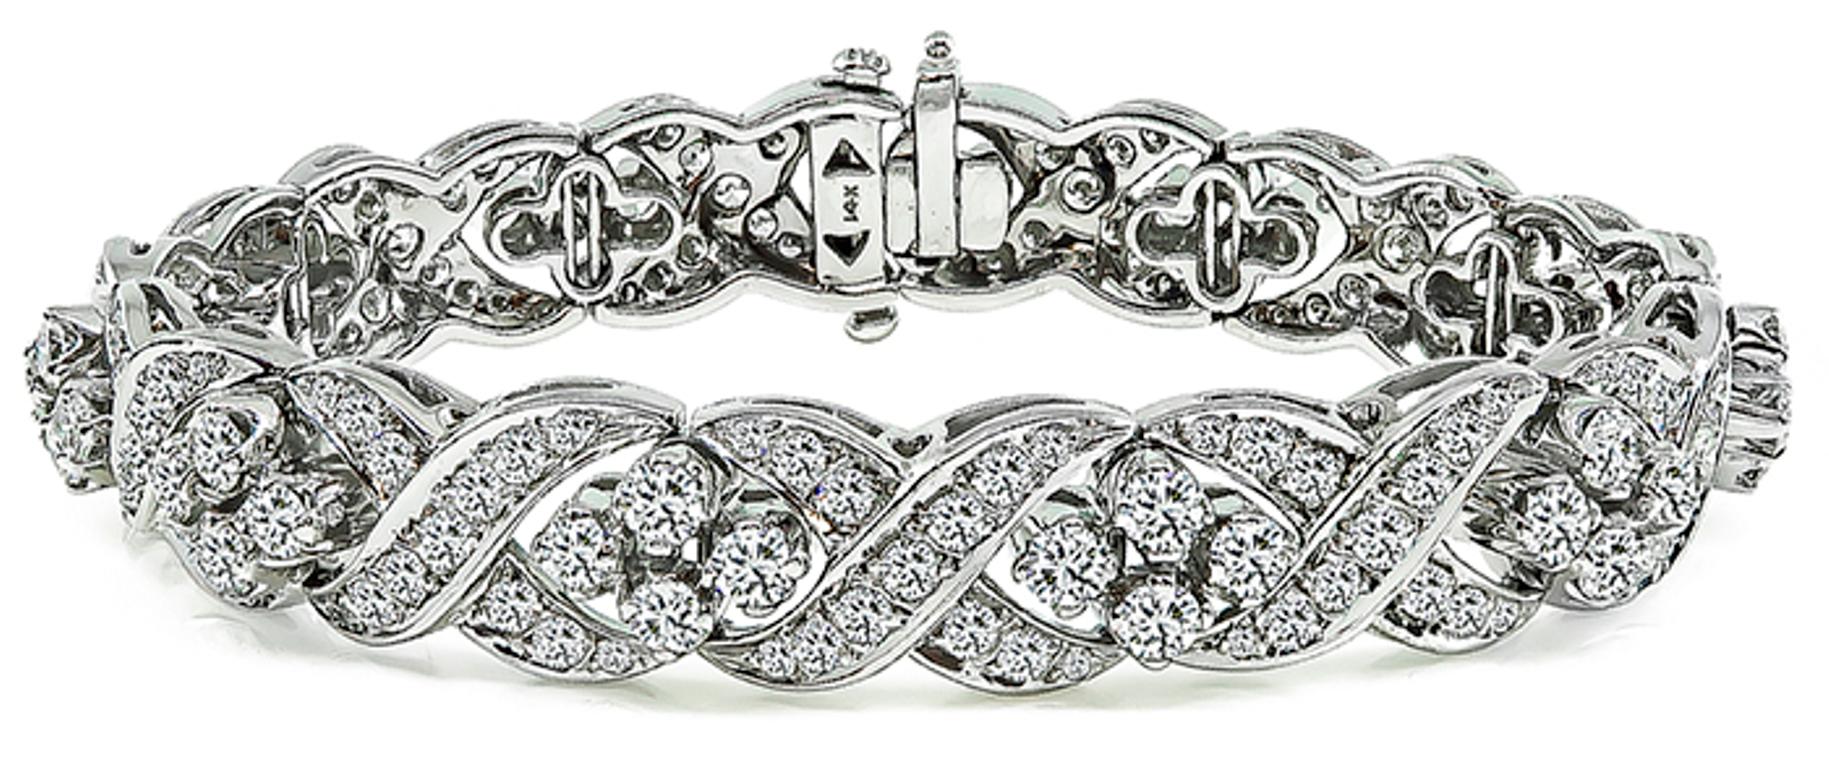 This fabulous 14k white gold bracelet is set with sparkling round cut diamonds that weigh approximately 13.00ct. graded G color with VS clarity. The bracelet measures 7 1/4 inches in length and 11mm in width.
It is stamped 14K and weighs 37.9